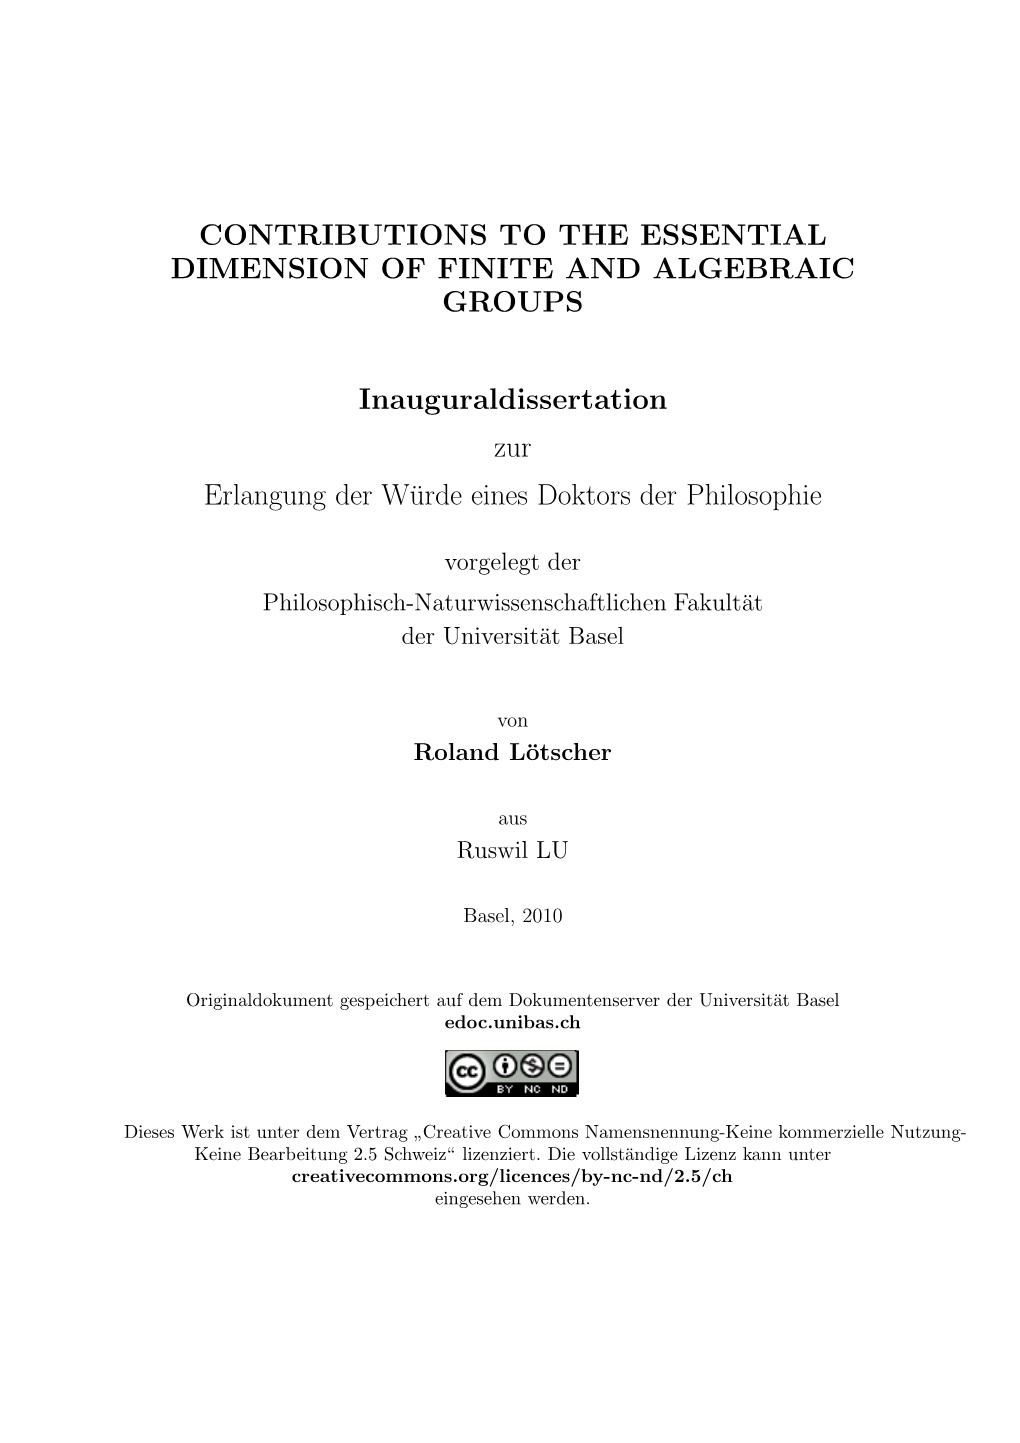 Contributions to the Essential Dimension of Finite and Algebraic Groups